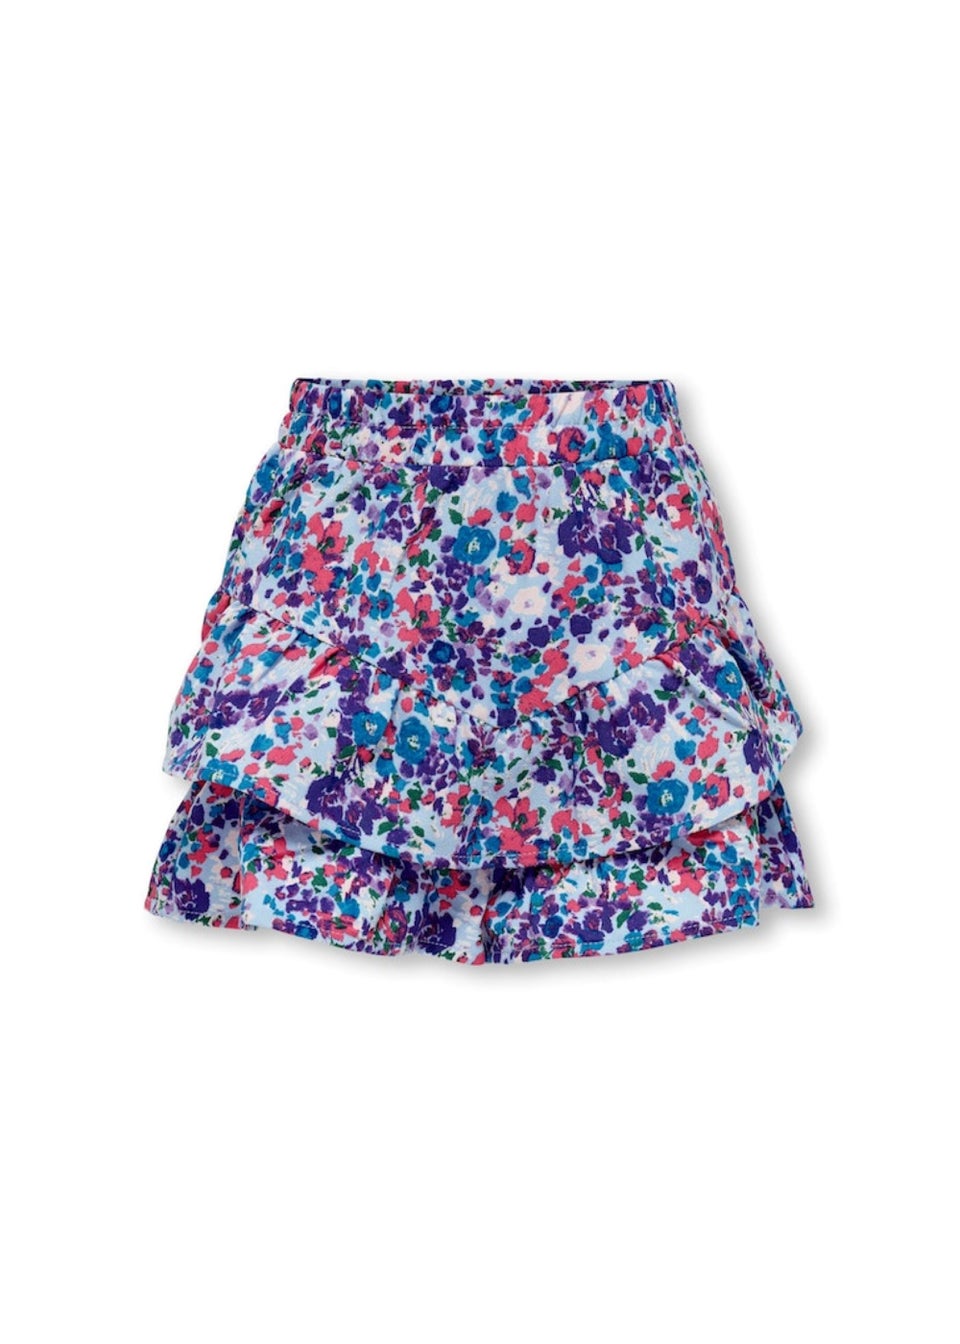 ONLY Kids Multicoloured Layered Skirt (6-14yrs)